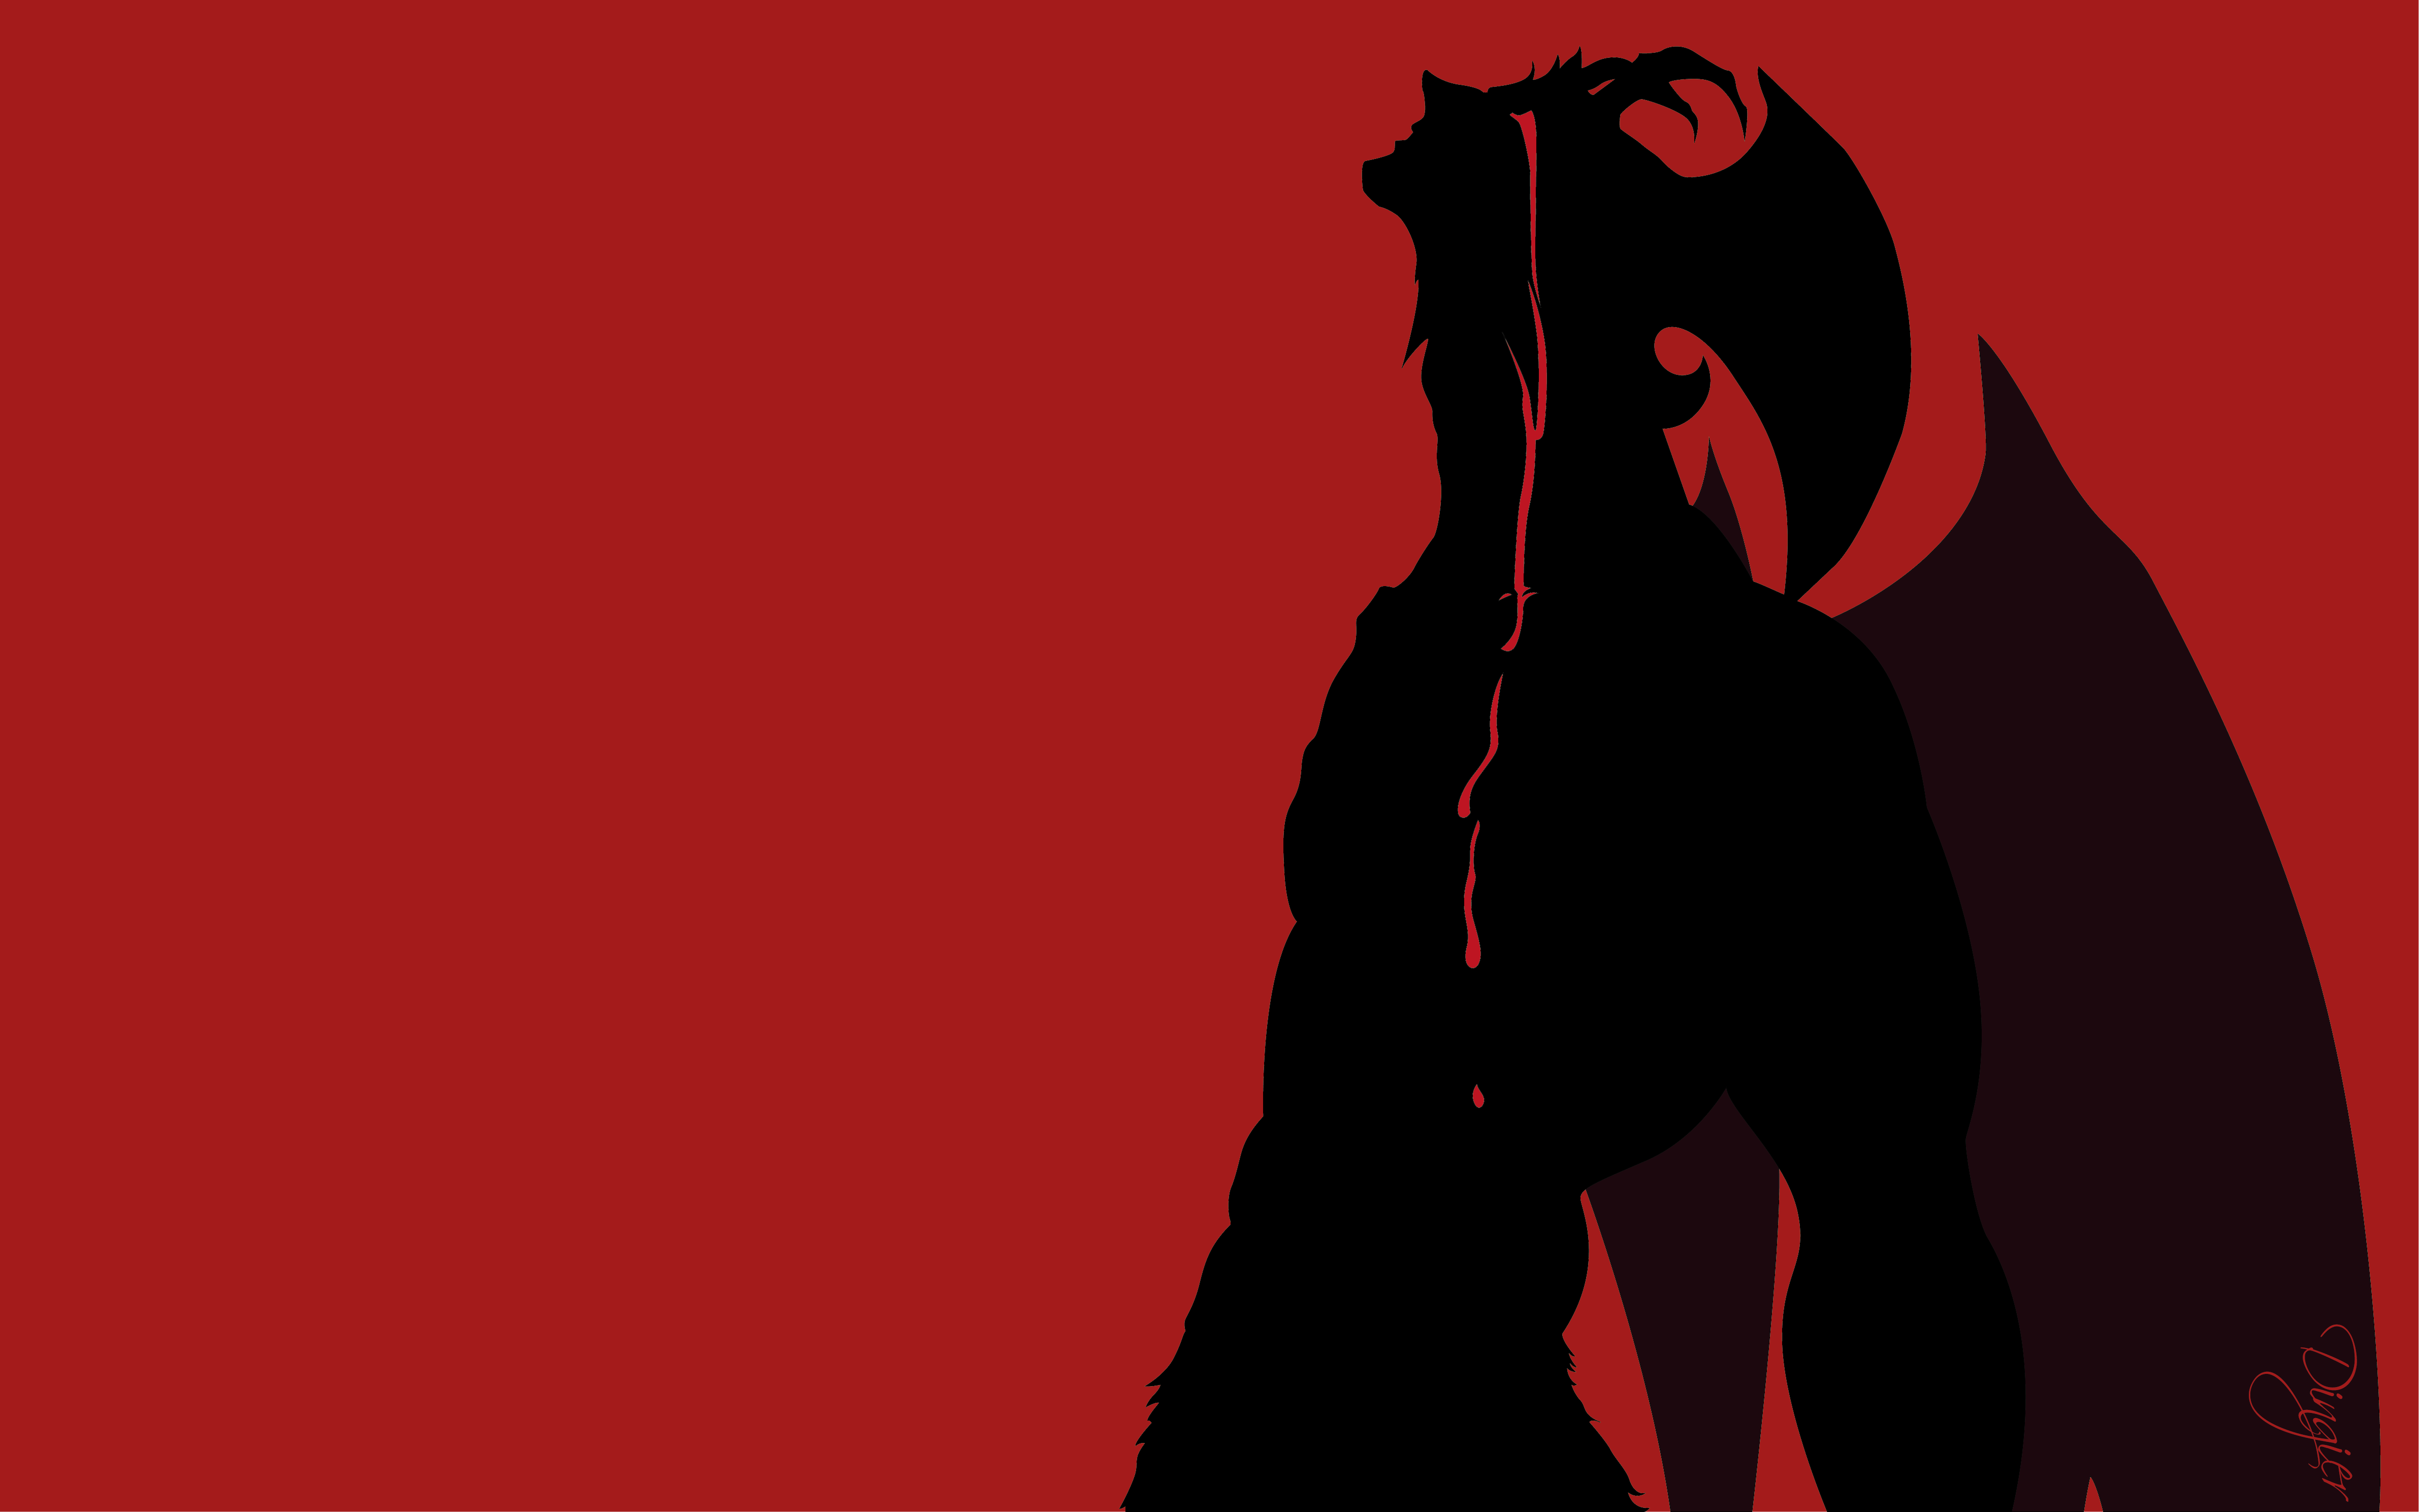 Anime Devilman: Crybaby HD Wallpaper | Background Image